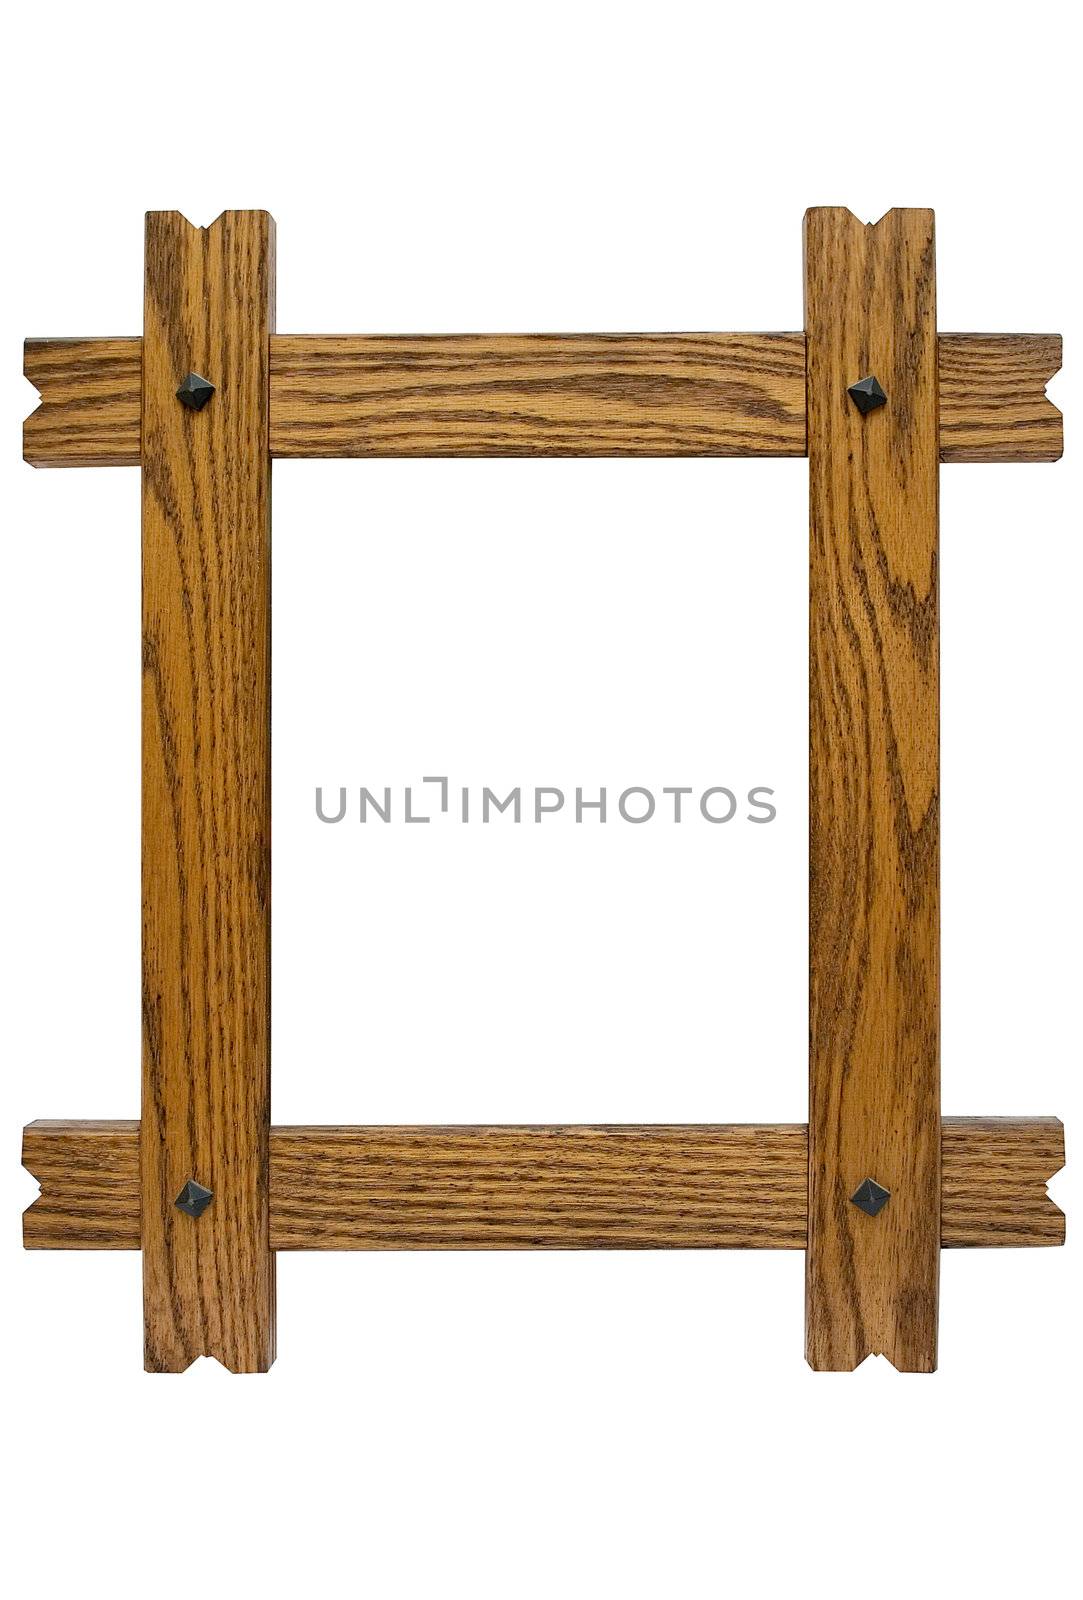 Wooden picture frame isolated on a white background. File contains clipping path.